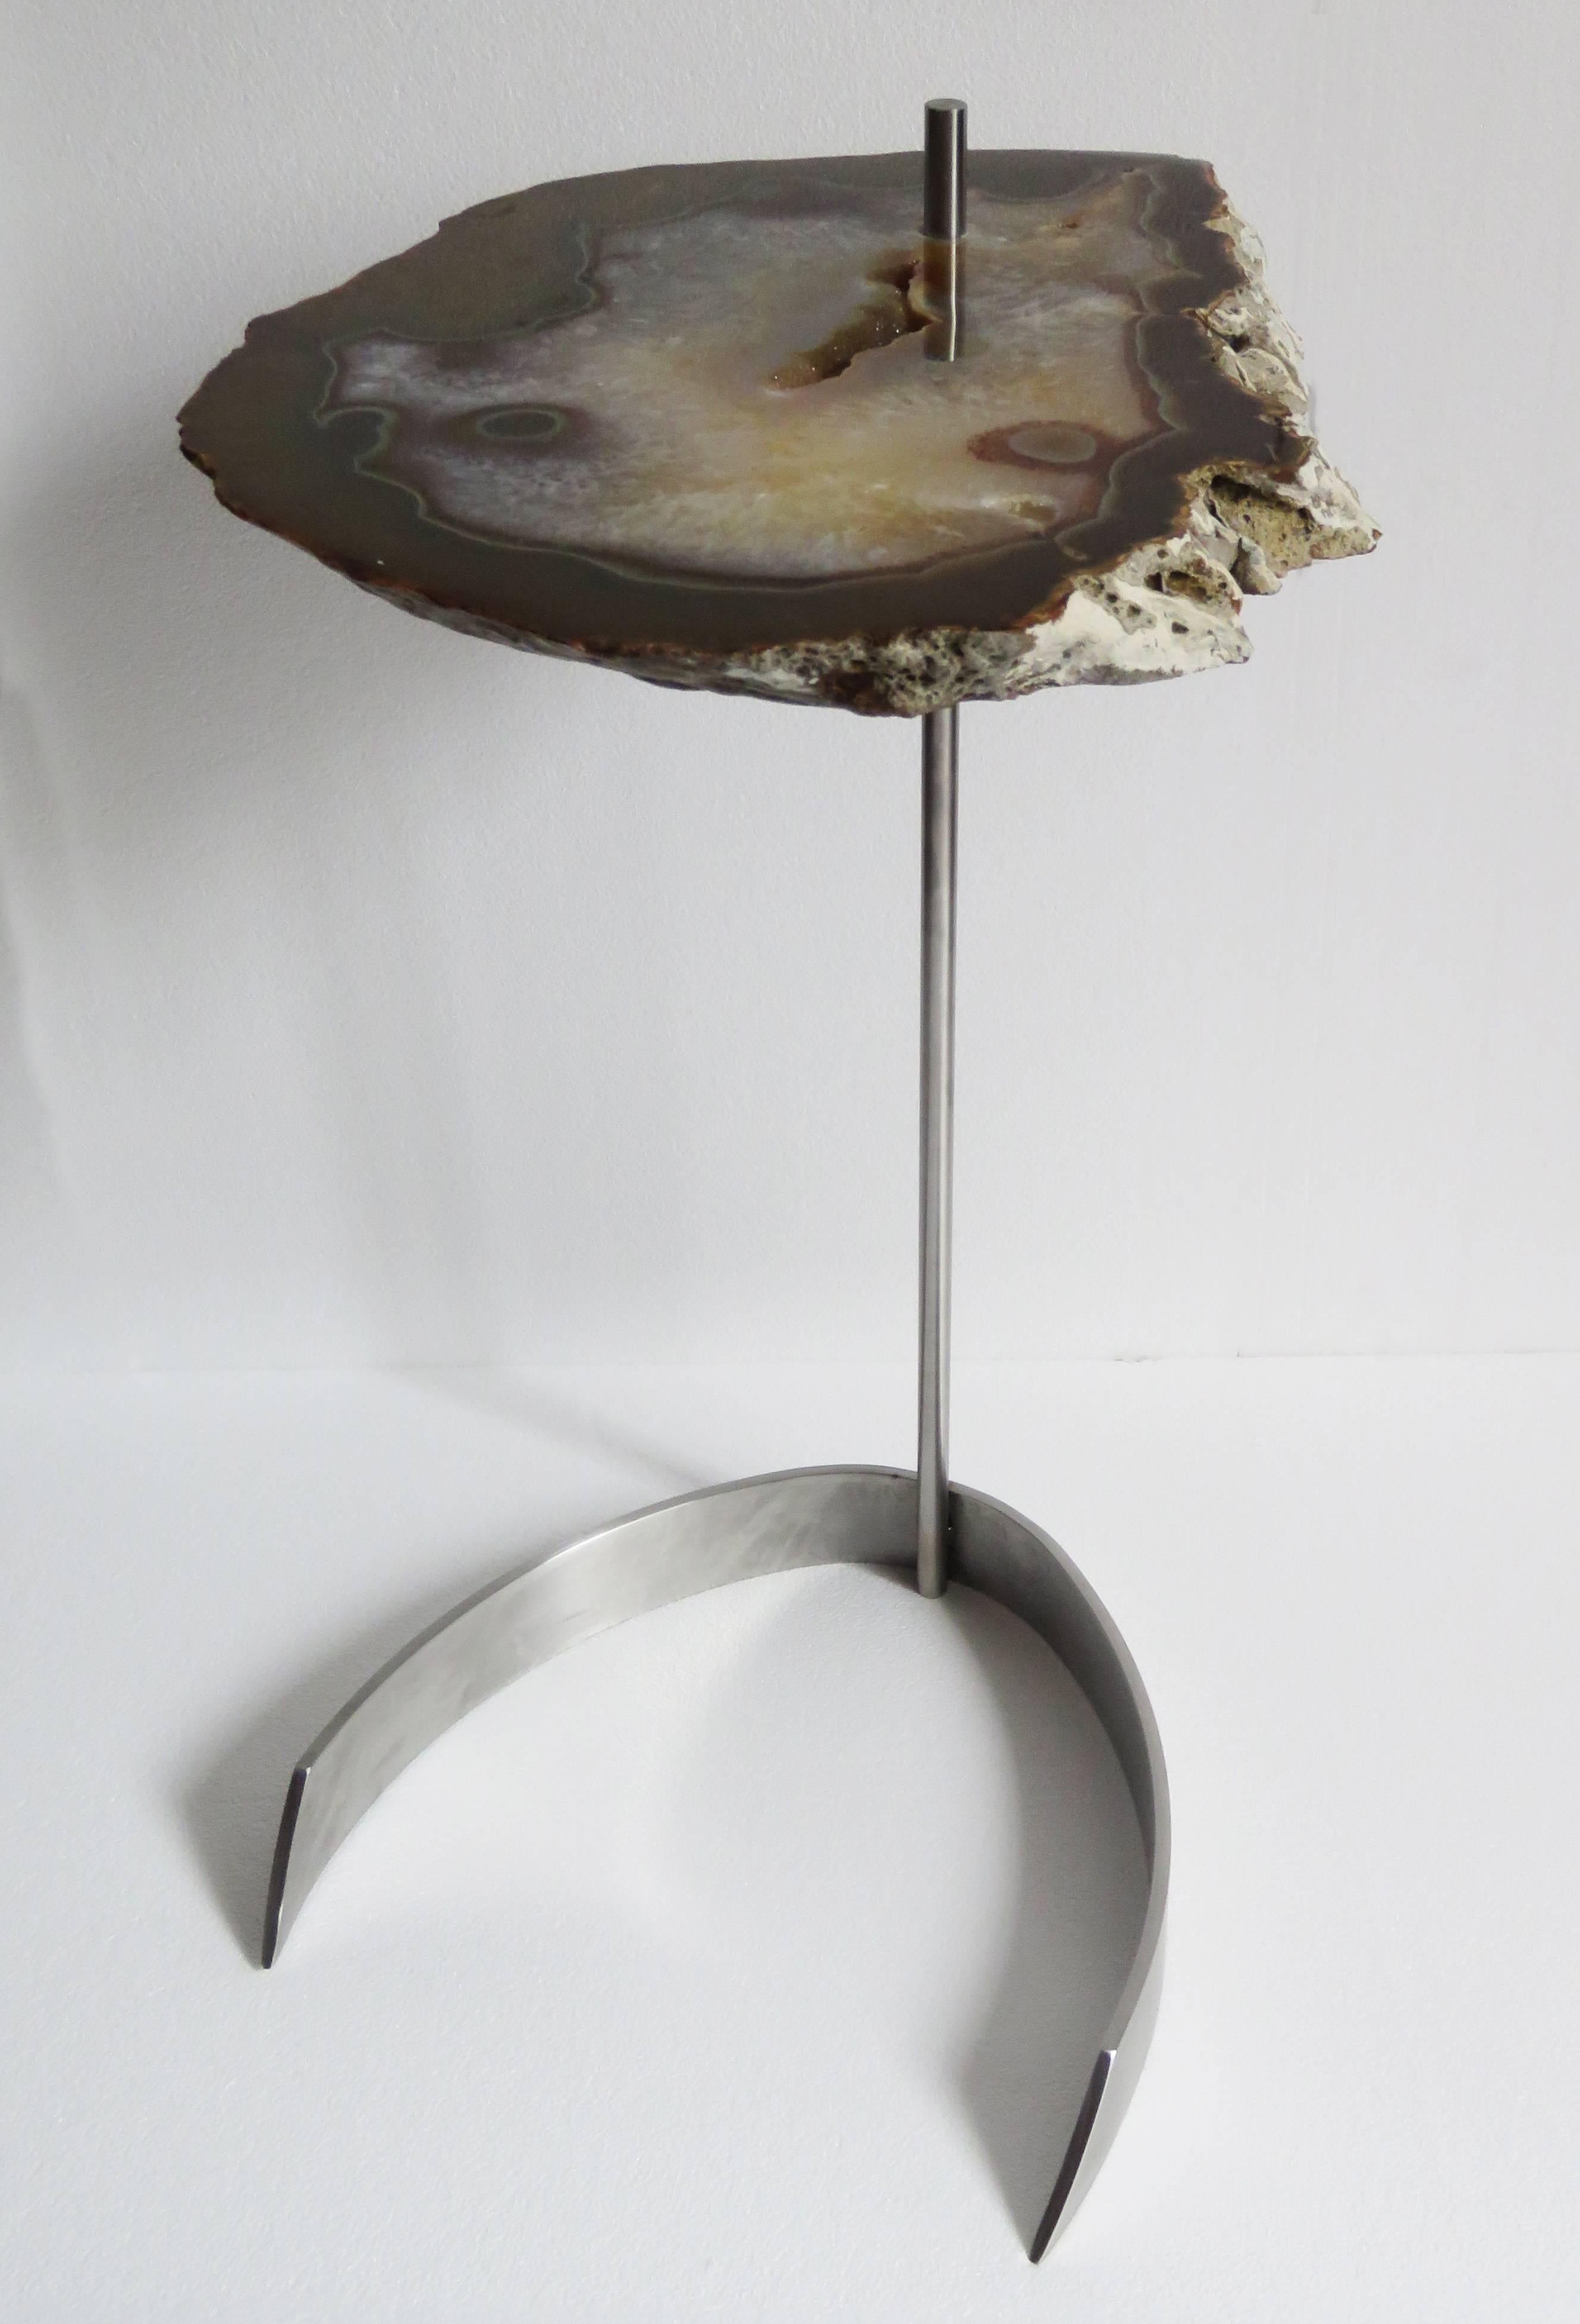 Organic Modern Brazilian Agate Adjustable Height Side or Cocktail Table, Stainless Steel Base